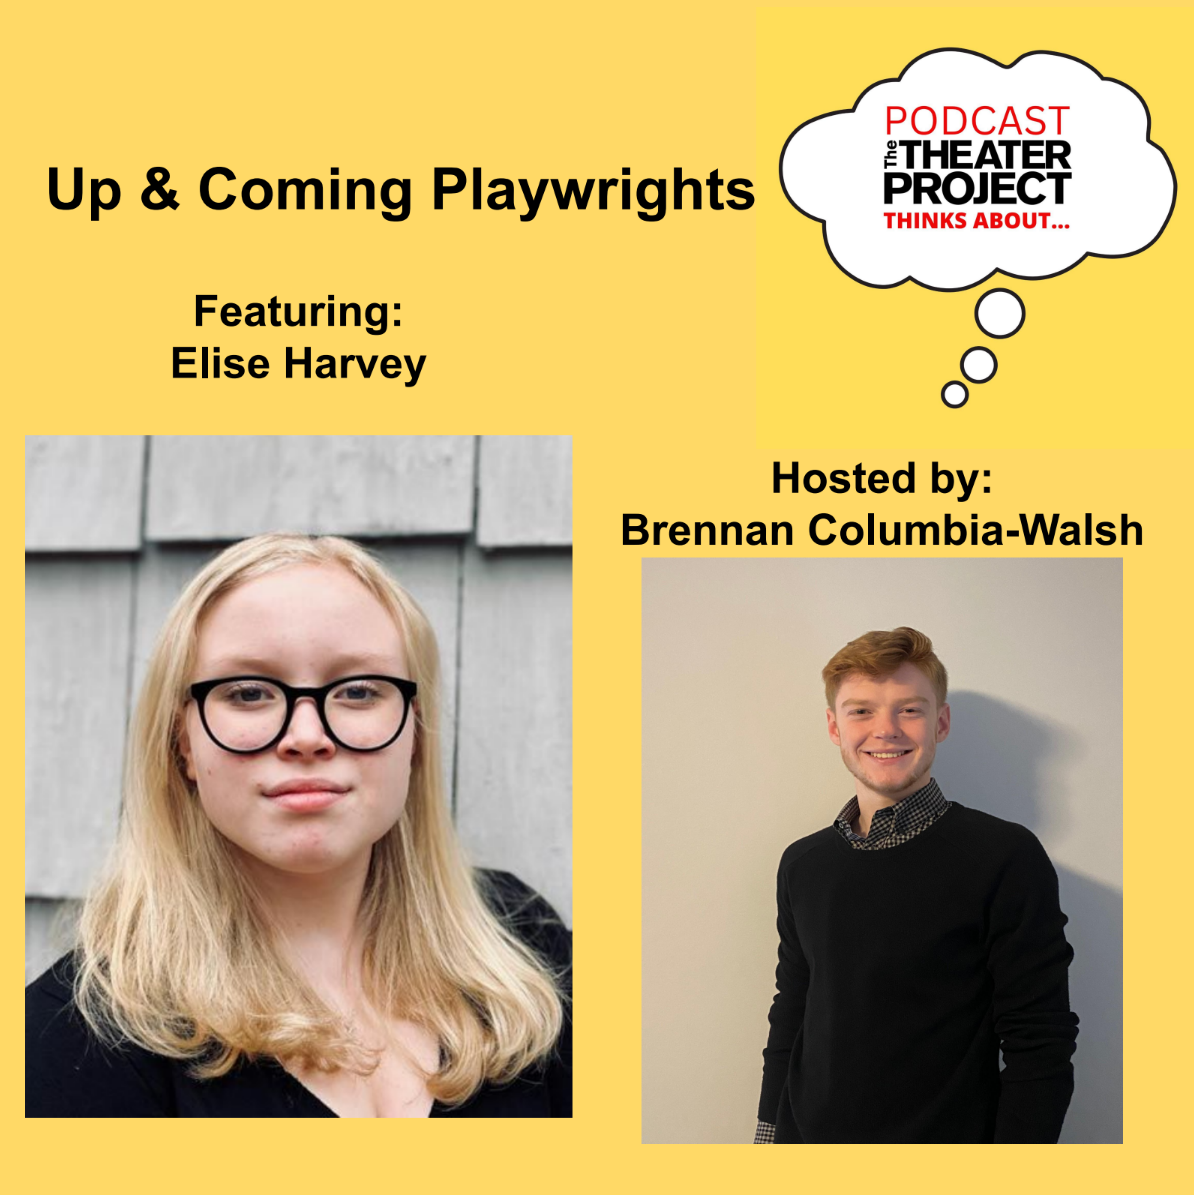 Up & Coming Playwrights. Featuring Elise Harvey. Hosted by Brennan Columbia-Walsh. The Theater Project Podcasts logo in the top right corner.